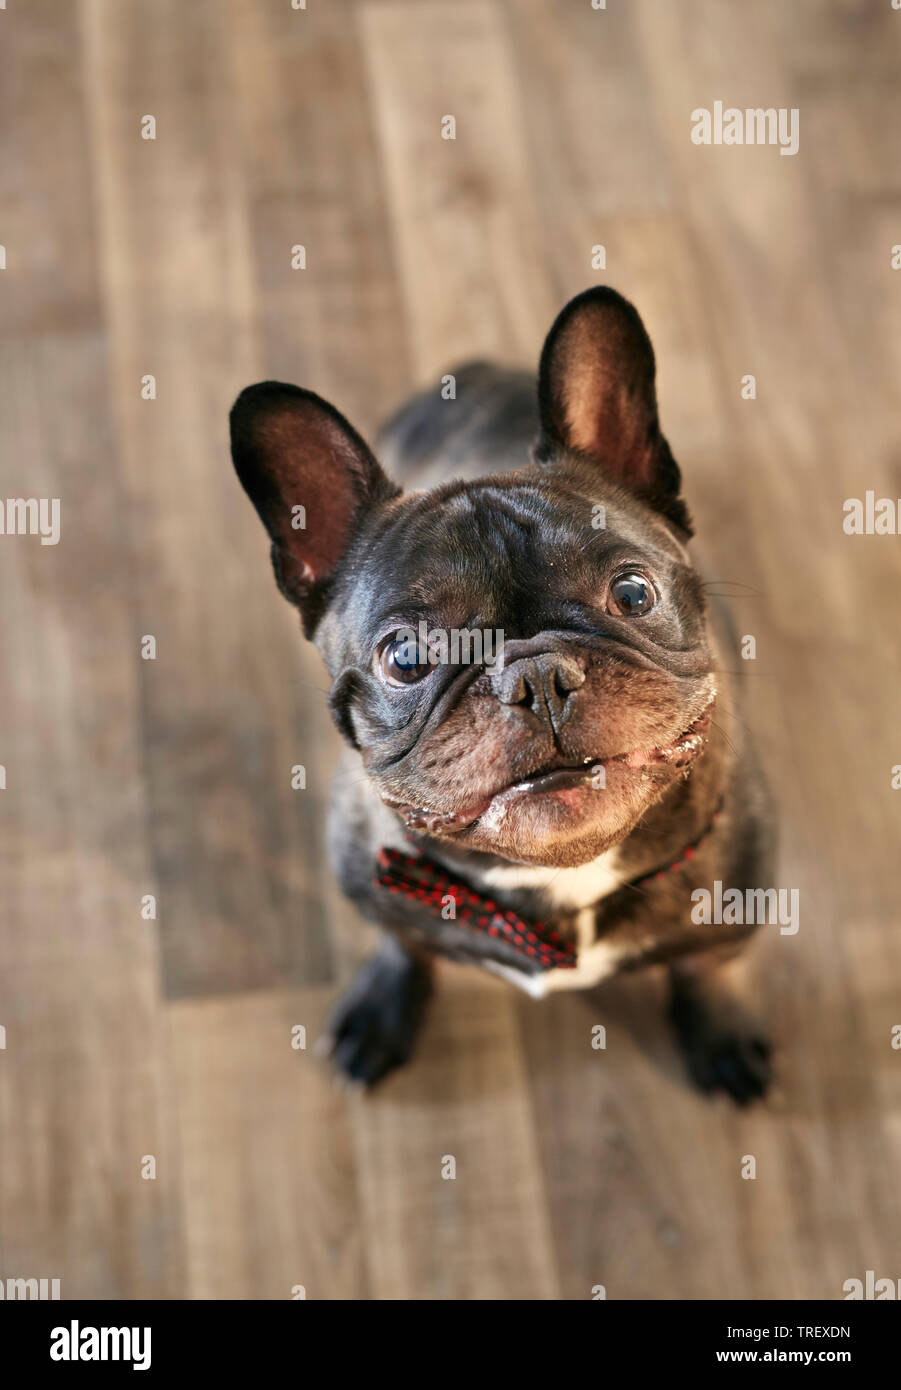 French Bulldog. Adult dog sitting on parquet while looking up. Germany.. Stock Photo